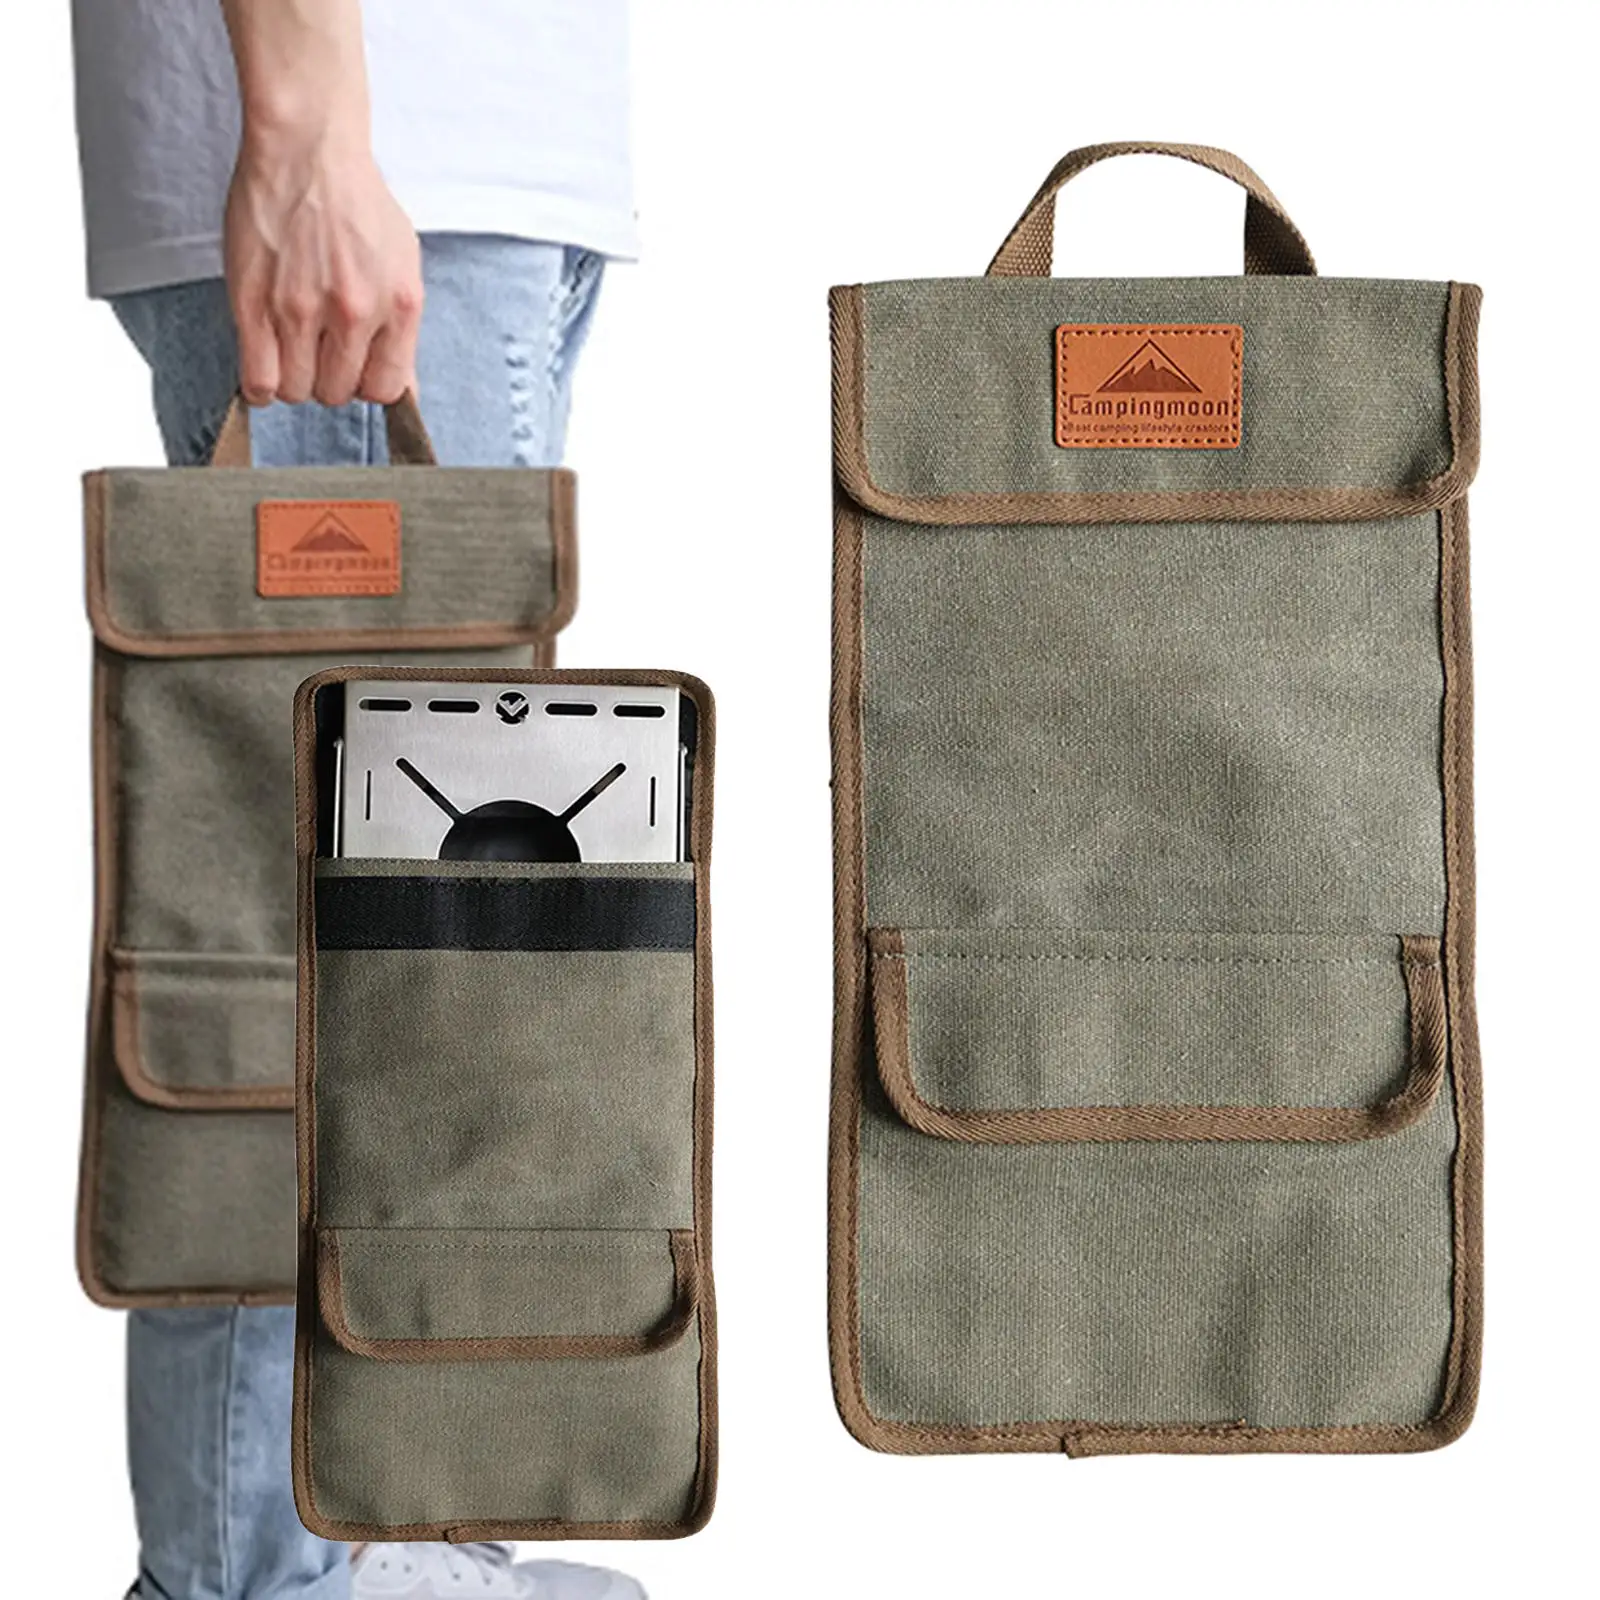 Durable Storage Bag Organizer Canvas Ground Nail Bag Handbag for Store Tent Pegs Folding Table Camping Accessories